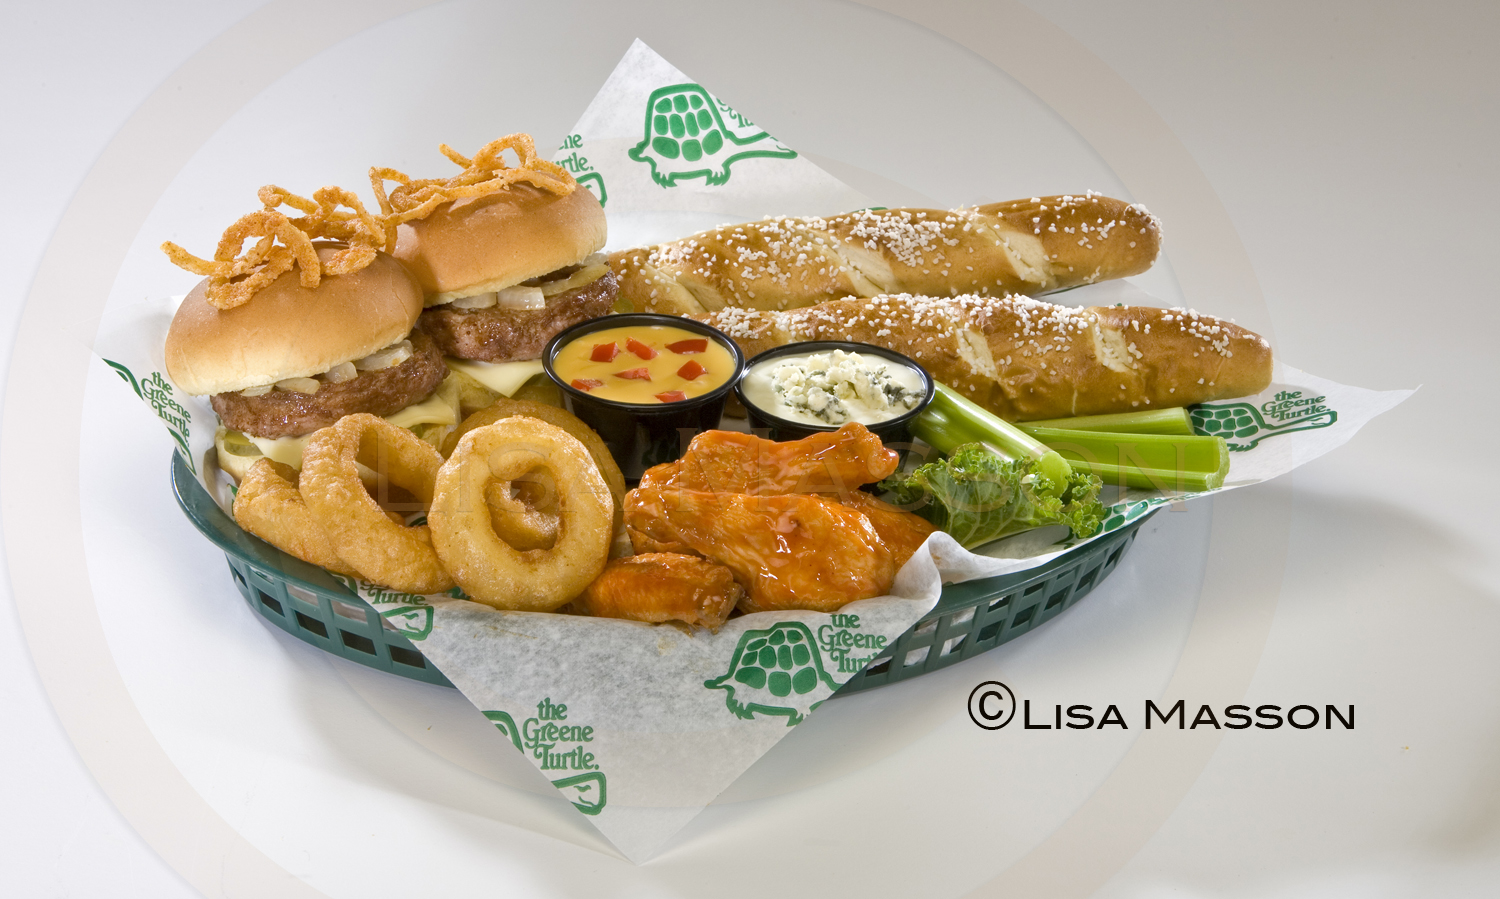 Combo Plate - Burger Sliders, Onion Rings, Chicken Wings, Pretzel Rolls, Cheese Dip - Green Turtle